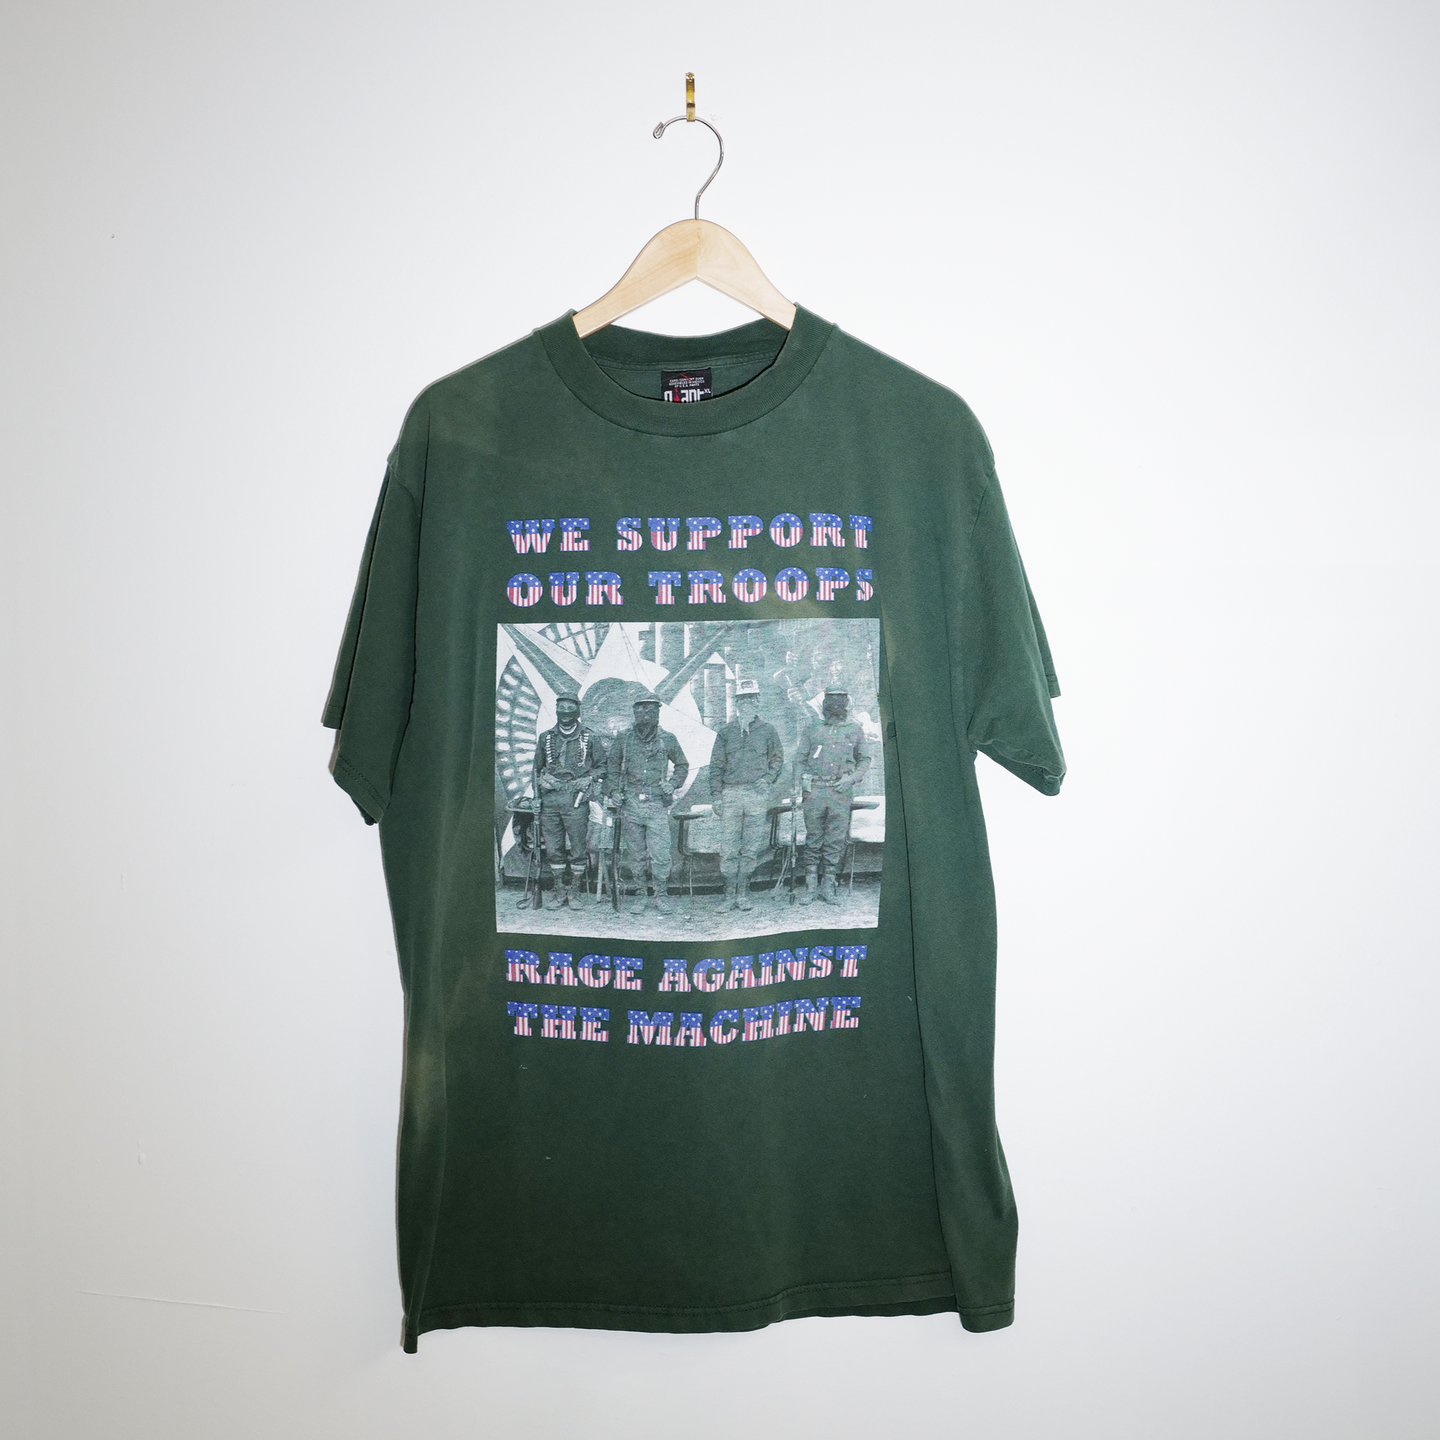 90s Rage Against The Machines “We Support our Troops” Tee – The